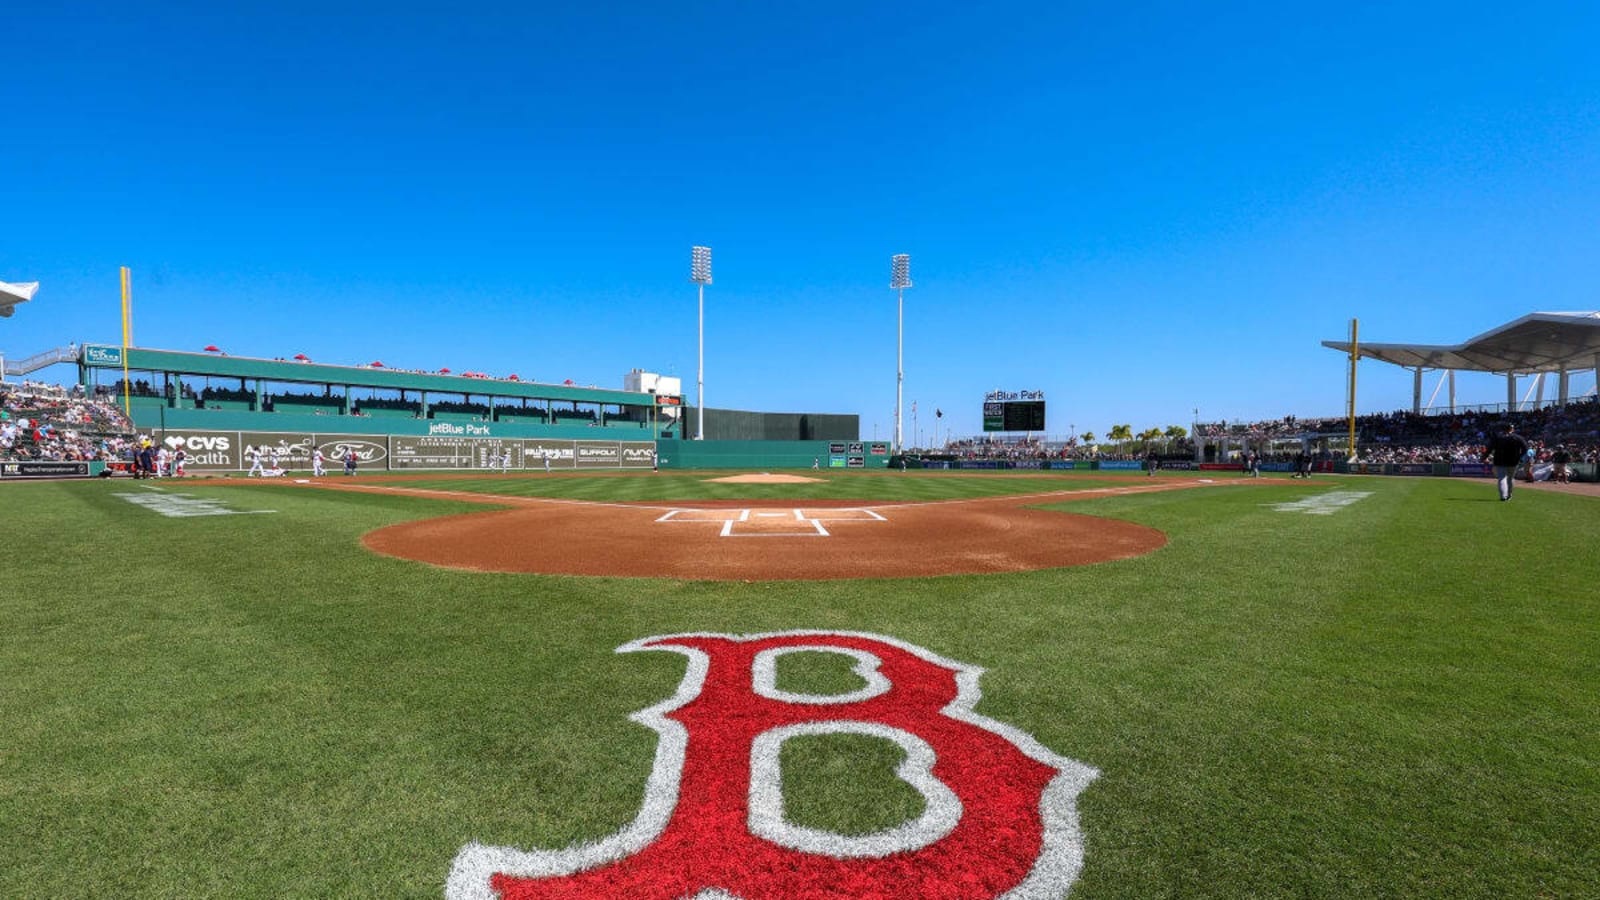 Elite Red Sox Prospect Stuns With Insane Play In Exciting Grapefruit League Debut